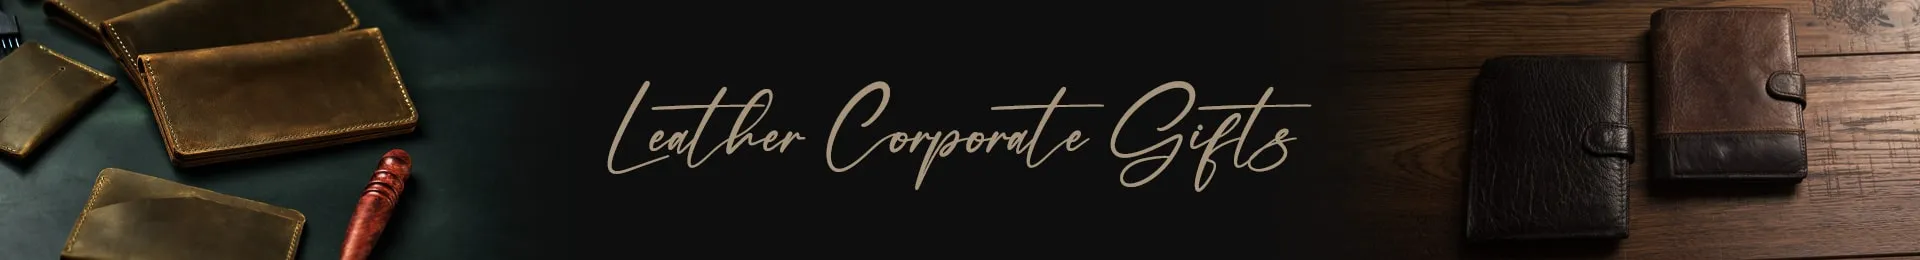 Shop Corporate Leather Gifts for Employees               